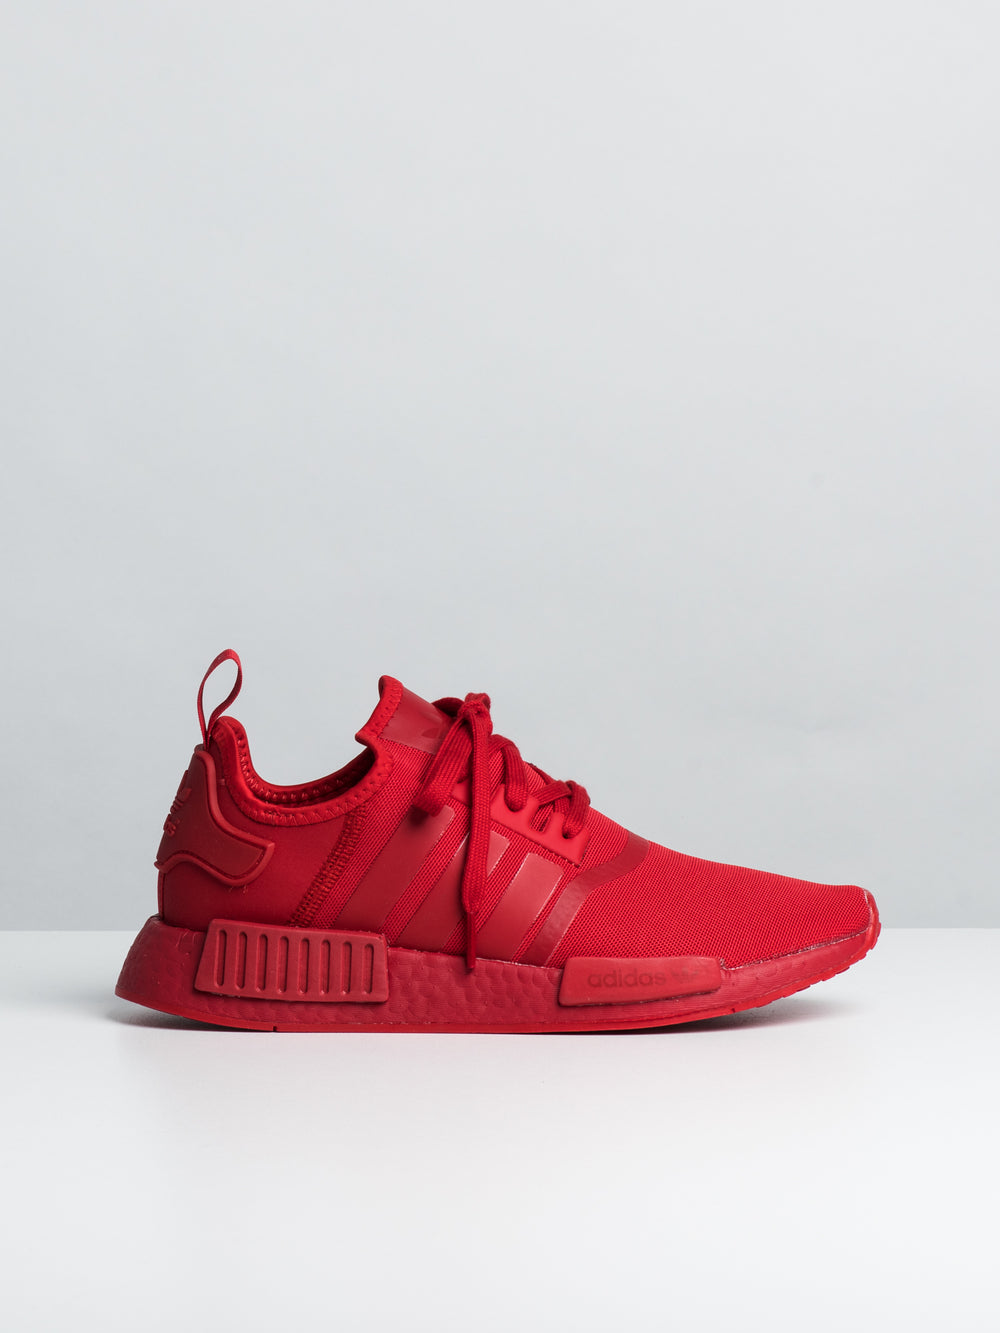 MENS ADIDAS NMD_R1 SNEAKERS - RED - CLEARANCE